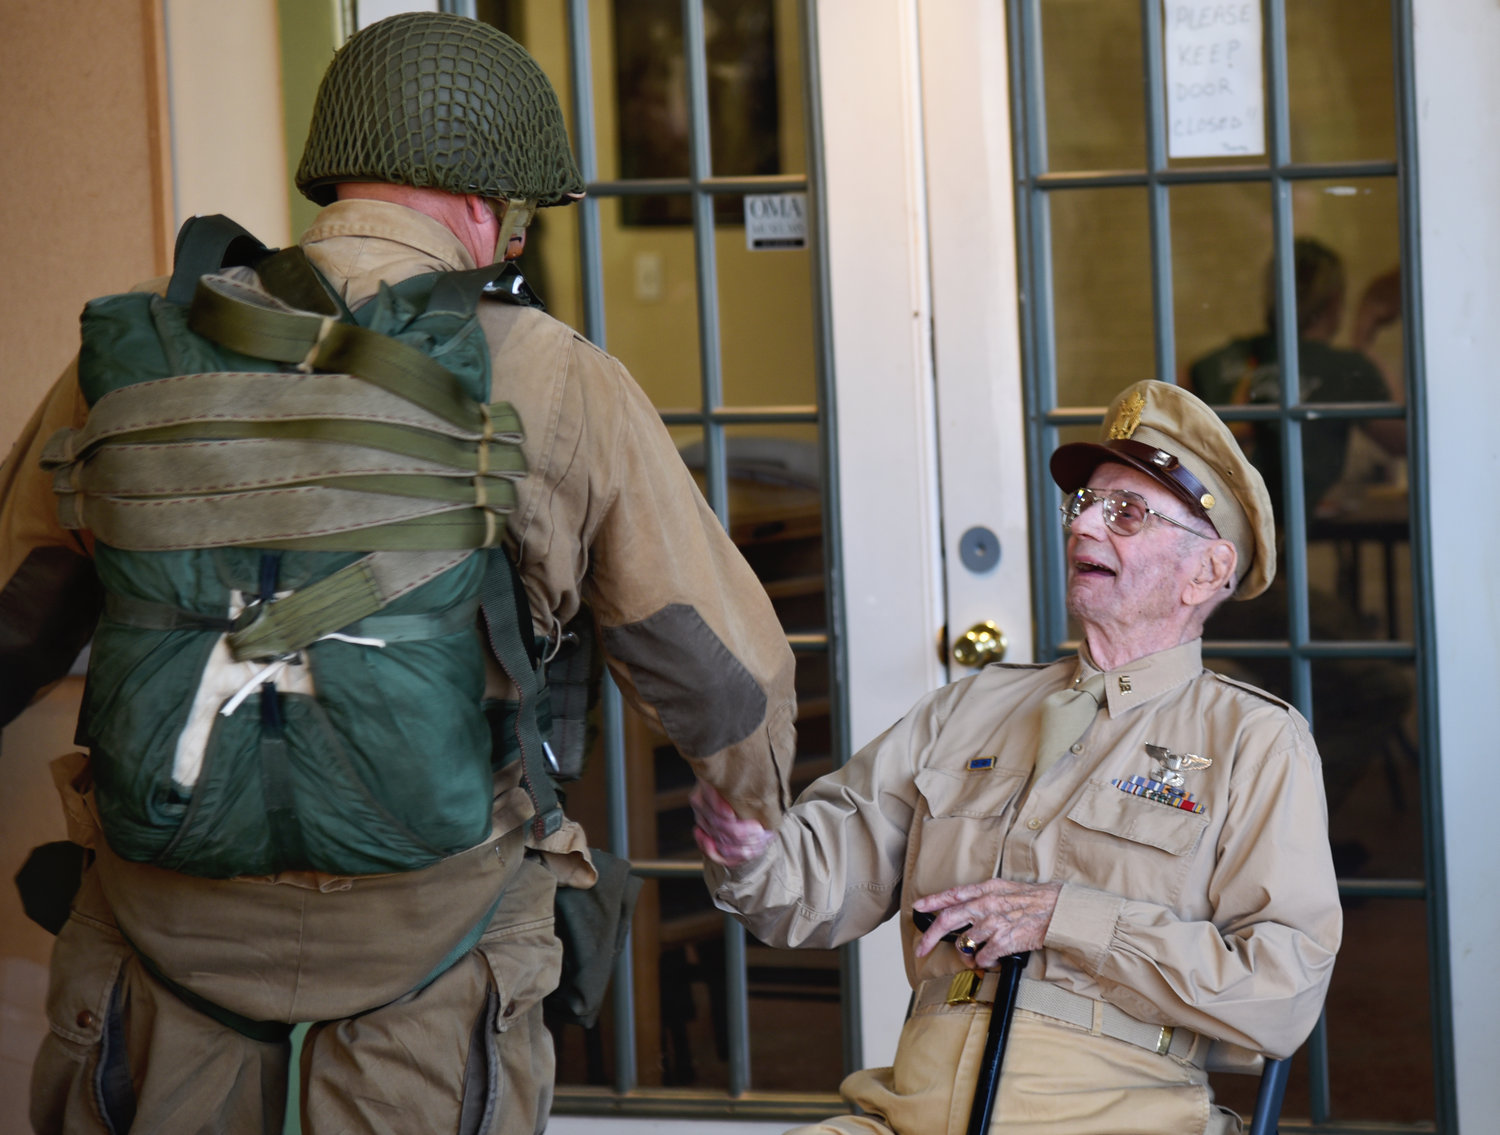 A World War II Airborne Demonstration Team member greets LTC Dave Hamilton, the last living World War II Pathfinder pilot, who celebrated his 100th birthday at Frederick Army Airfield July 16, 2022.